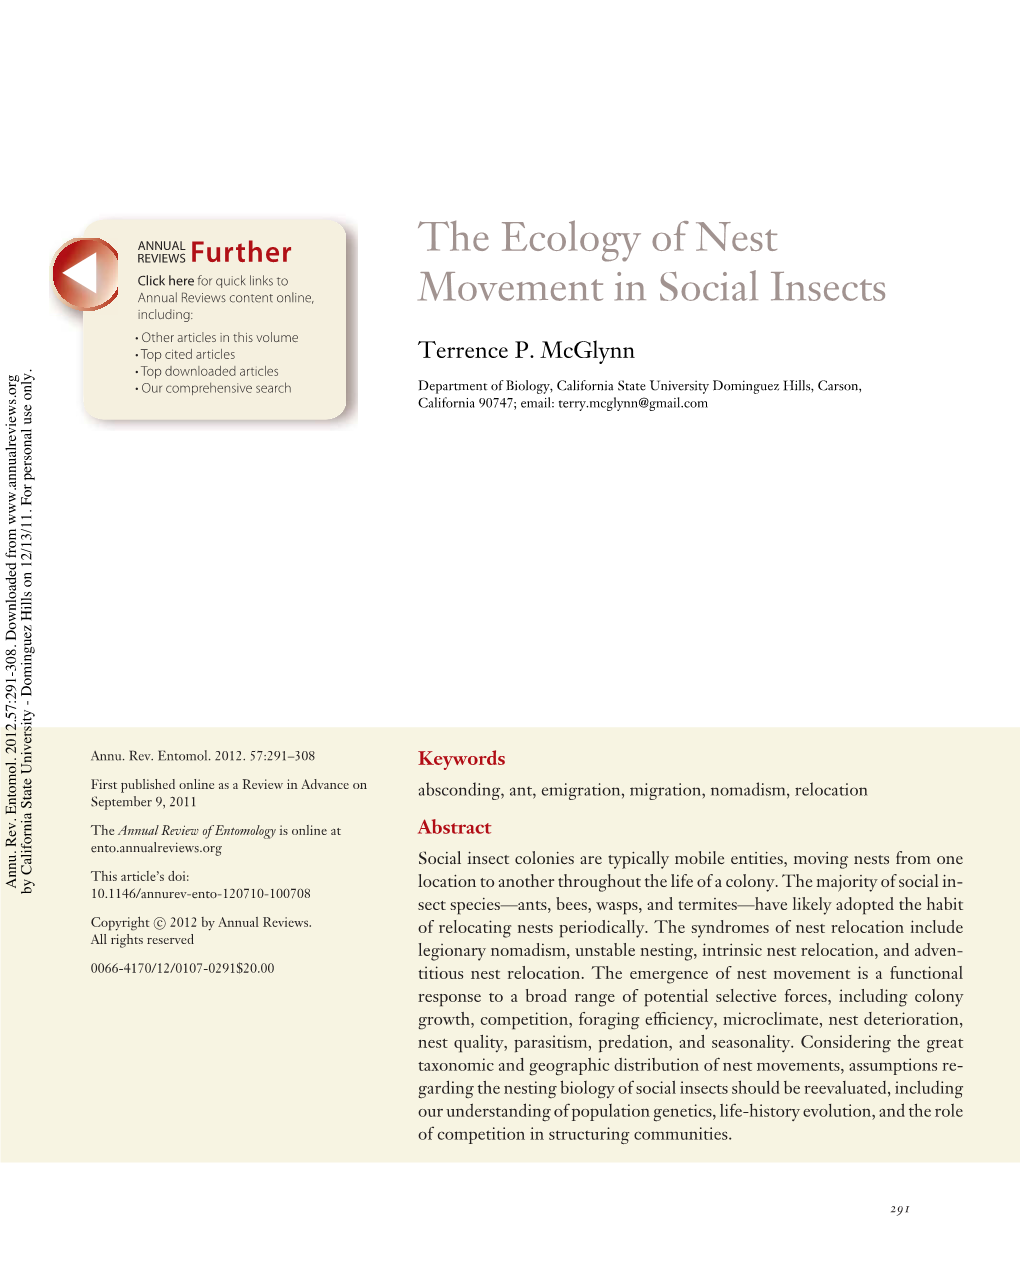 The Ecology of Nest Movement in Social Insects